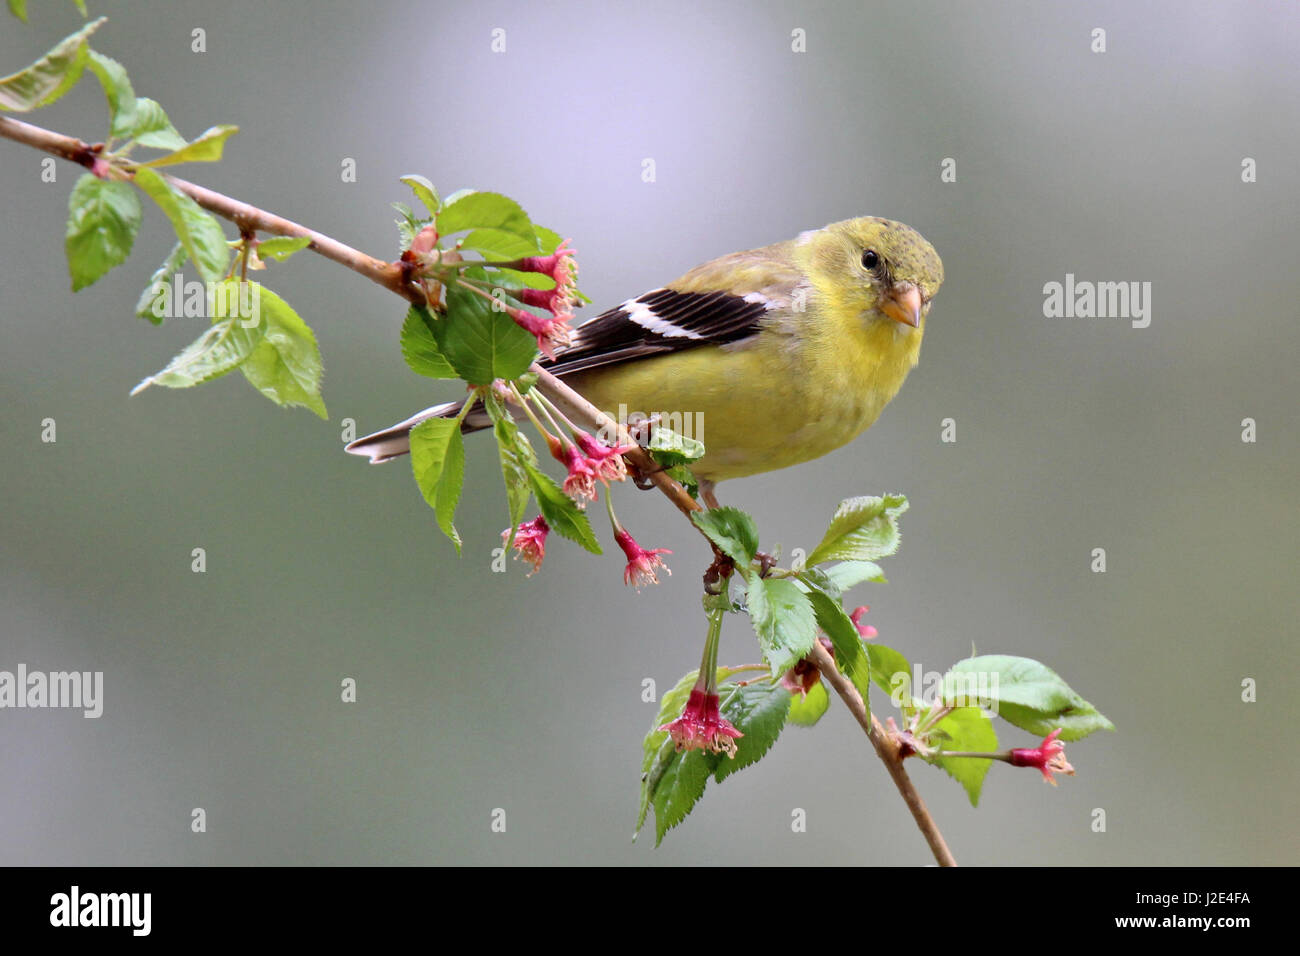 A female American goldfinch Carduelis trusts perching on flowering branches in Spring Stock Photo